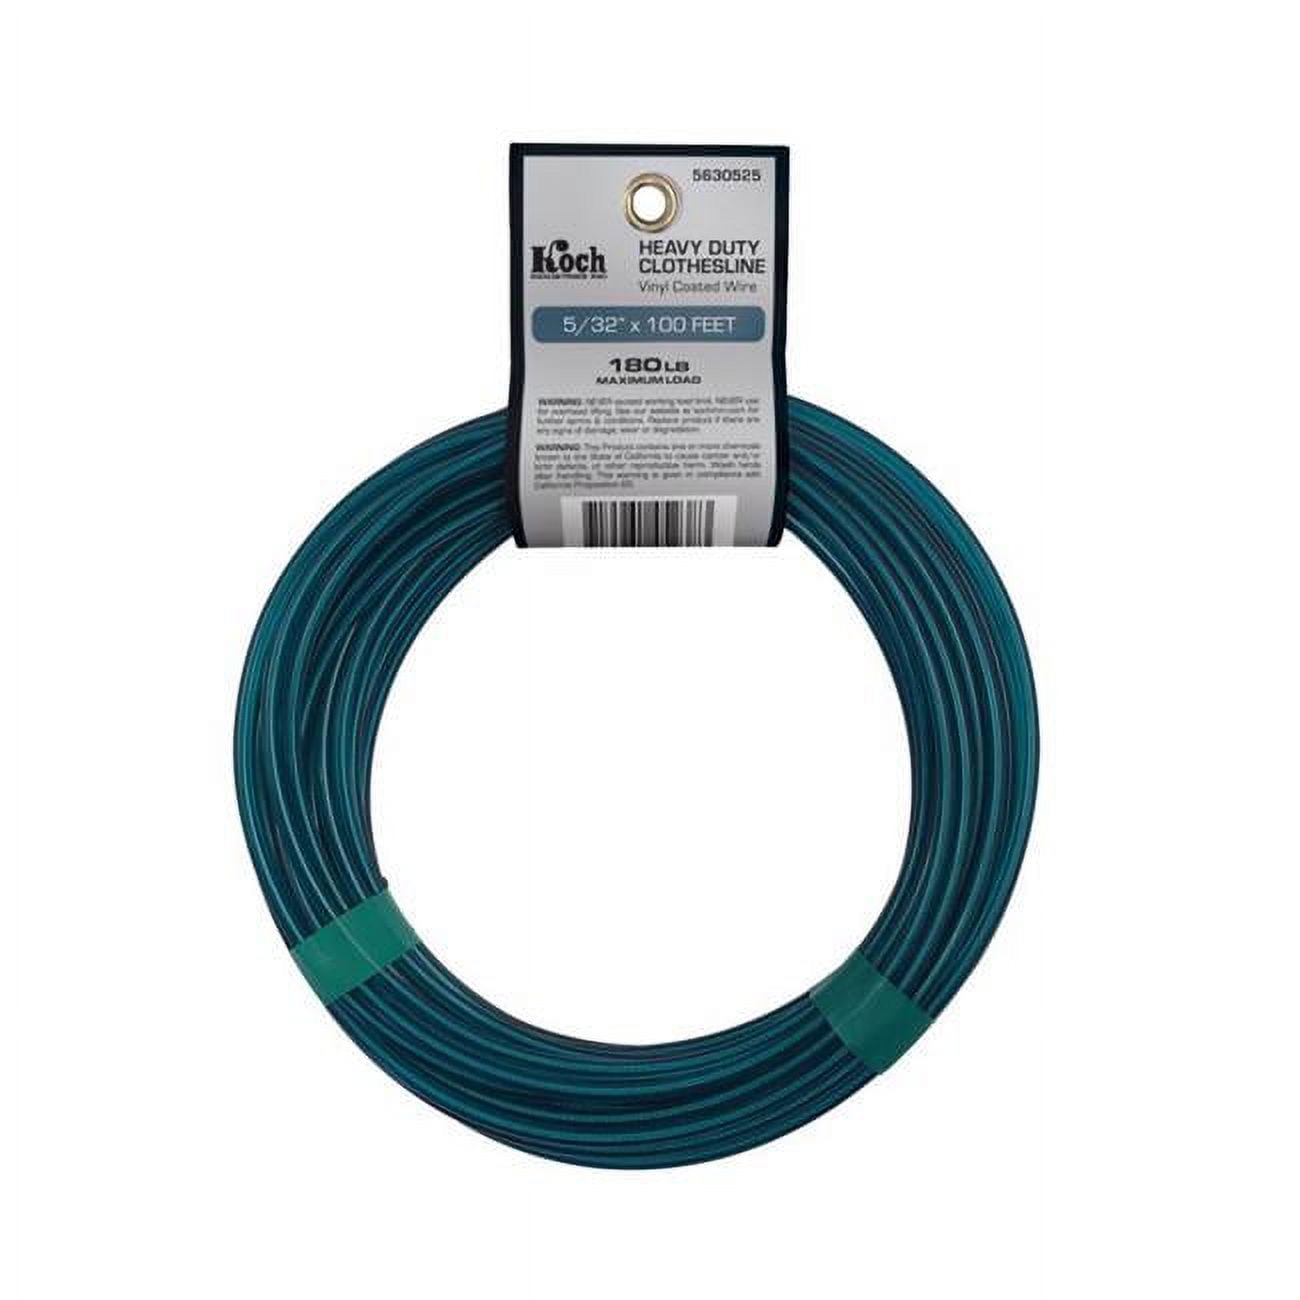 Picture of Koch 7023676 0.15 in. x 100 ft. Green Cabled Wire Vinyl Clothesline Wire